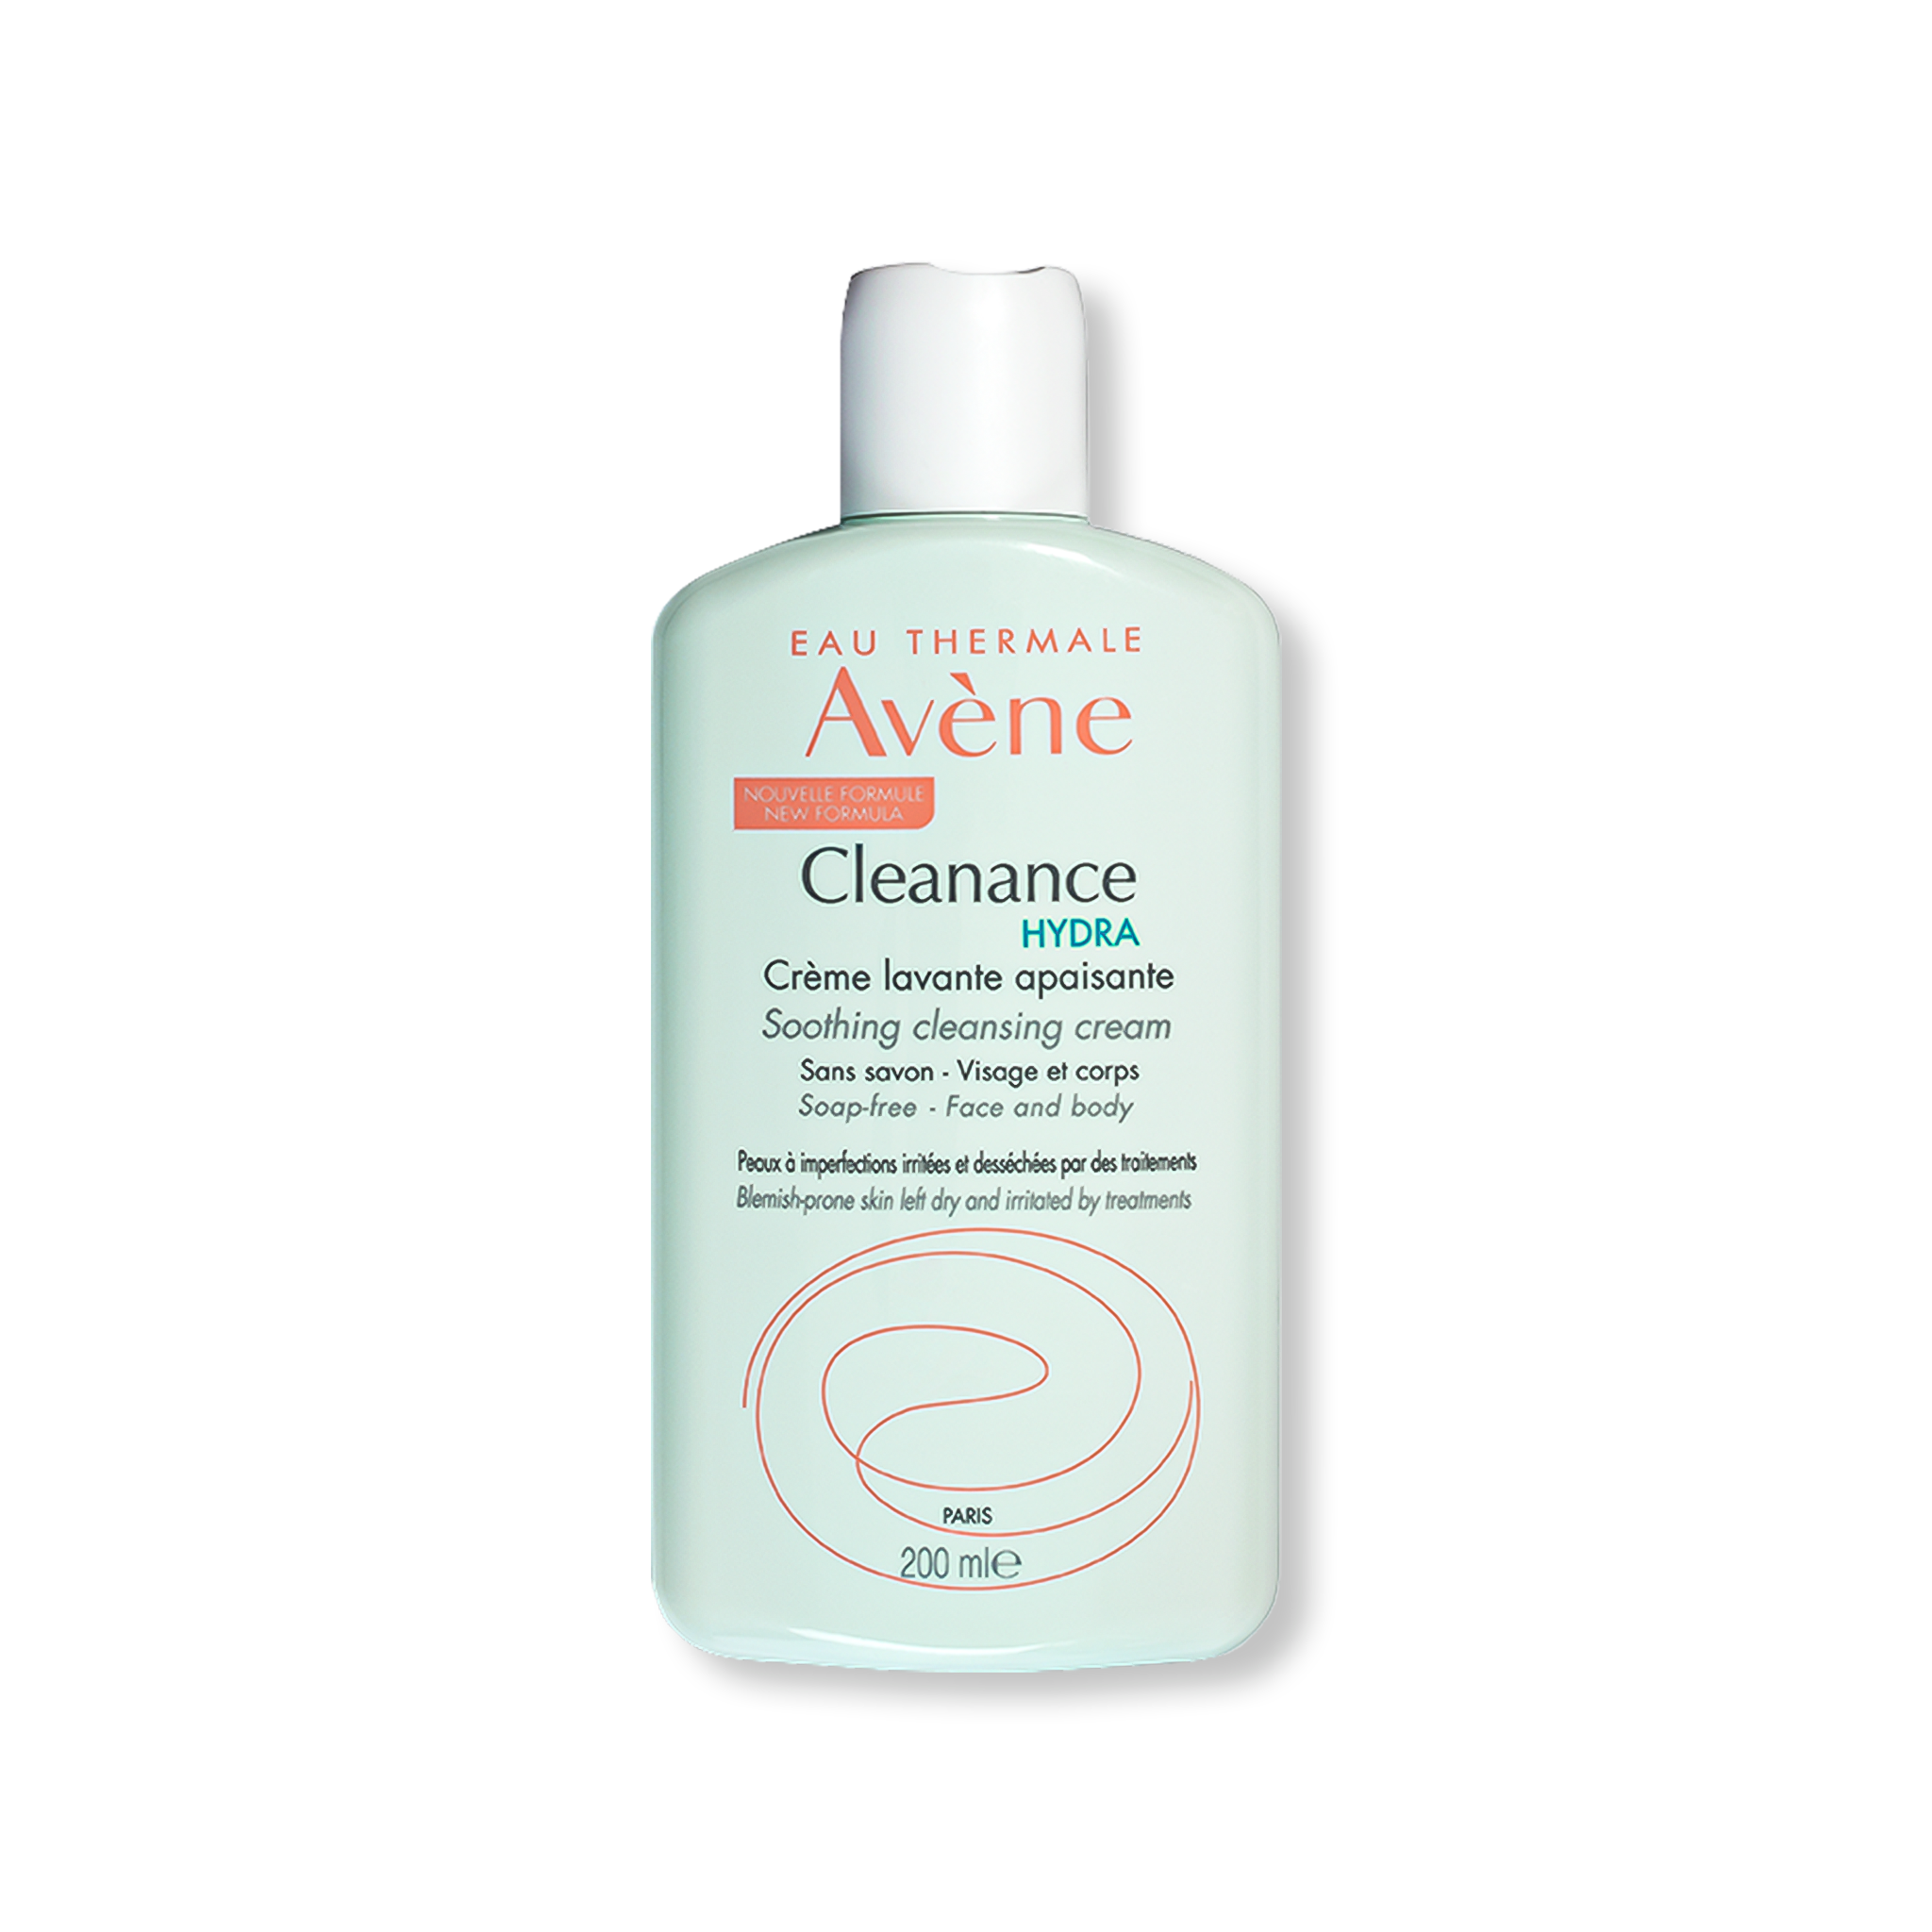 Avène Cleanance HYDRA Soothing Cleansing Cream